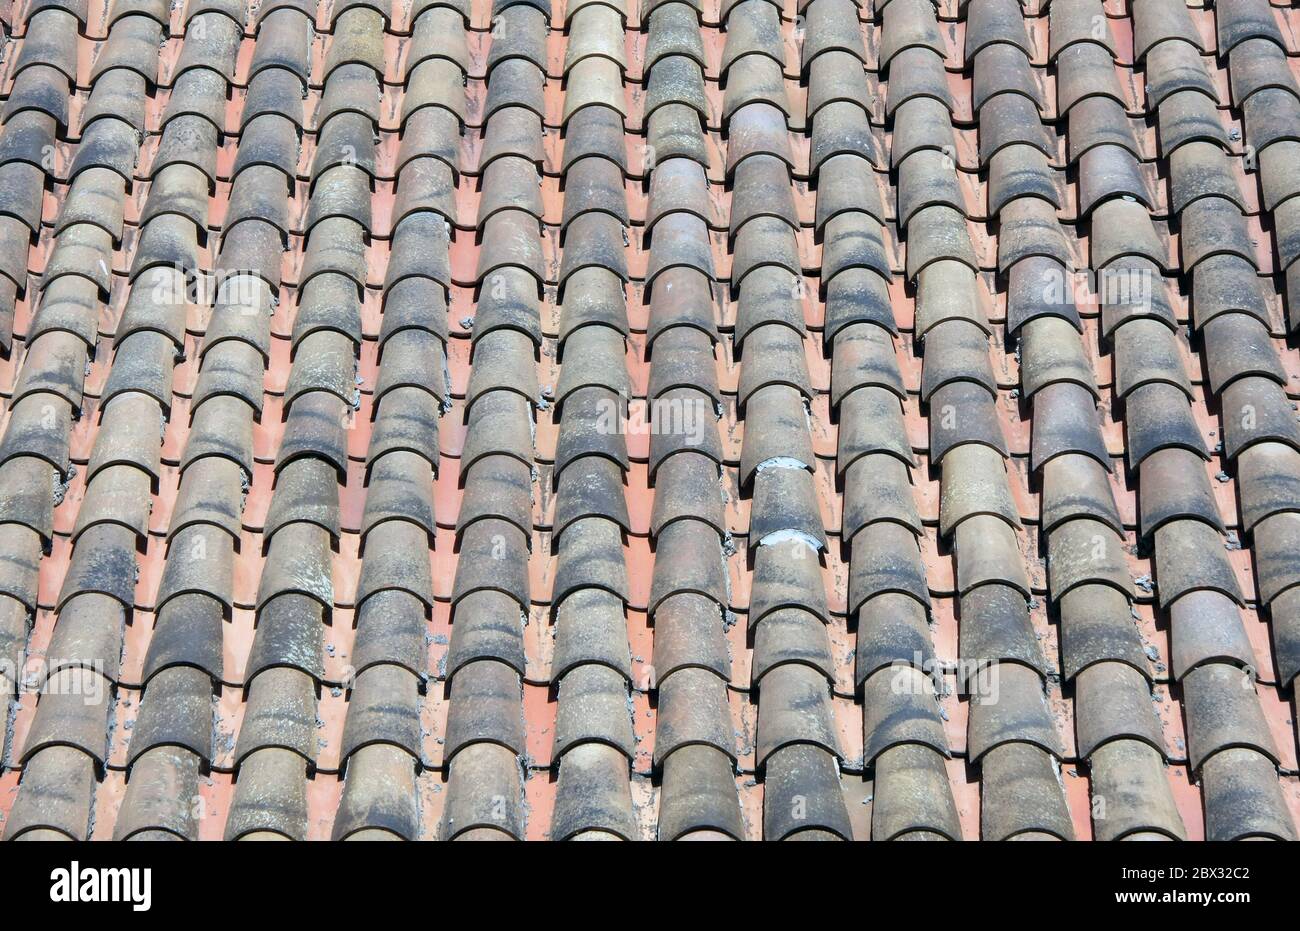 Clay roof tile texture/pattern Stock Photo - Alamy